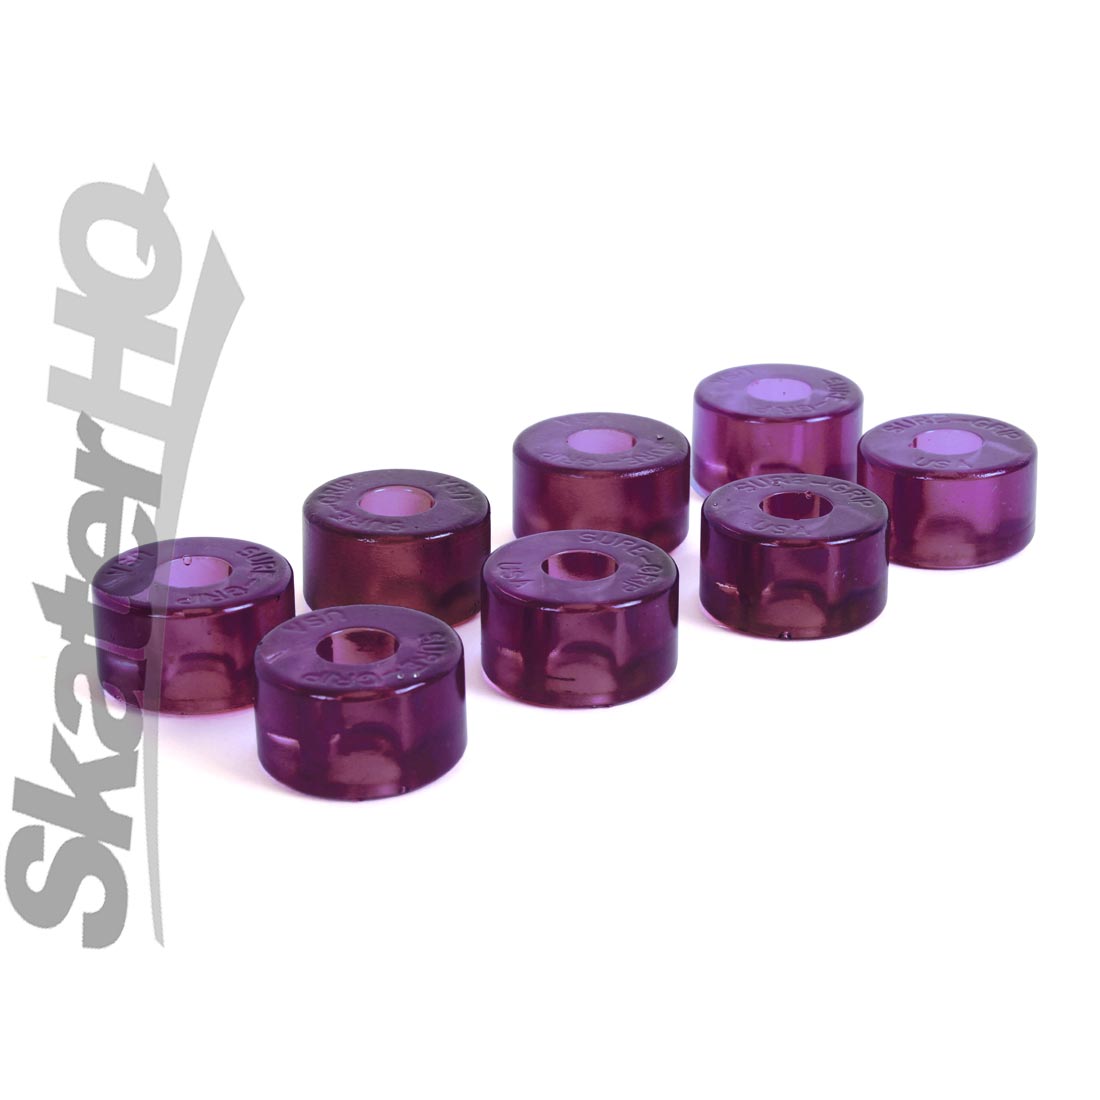 Sure-Grip Barrel Cushions 85a 8pk - Purple Roller Skate Hardware and Parts